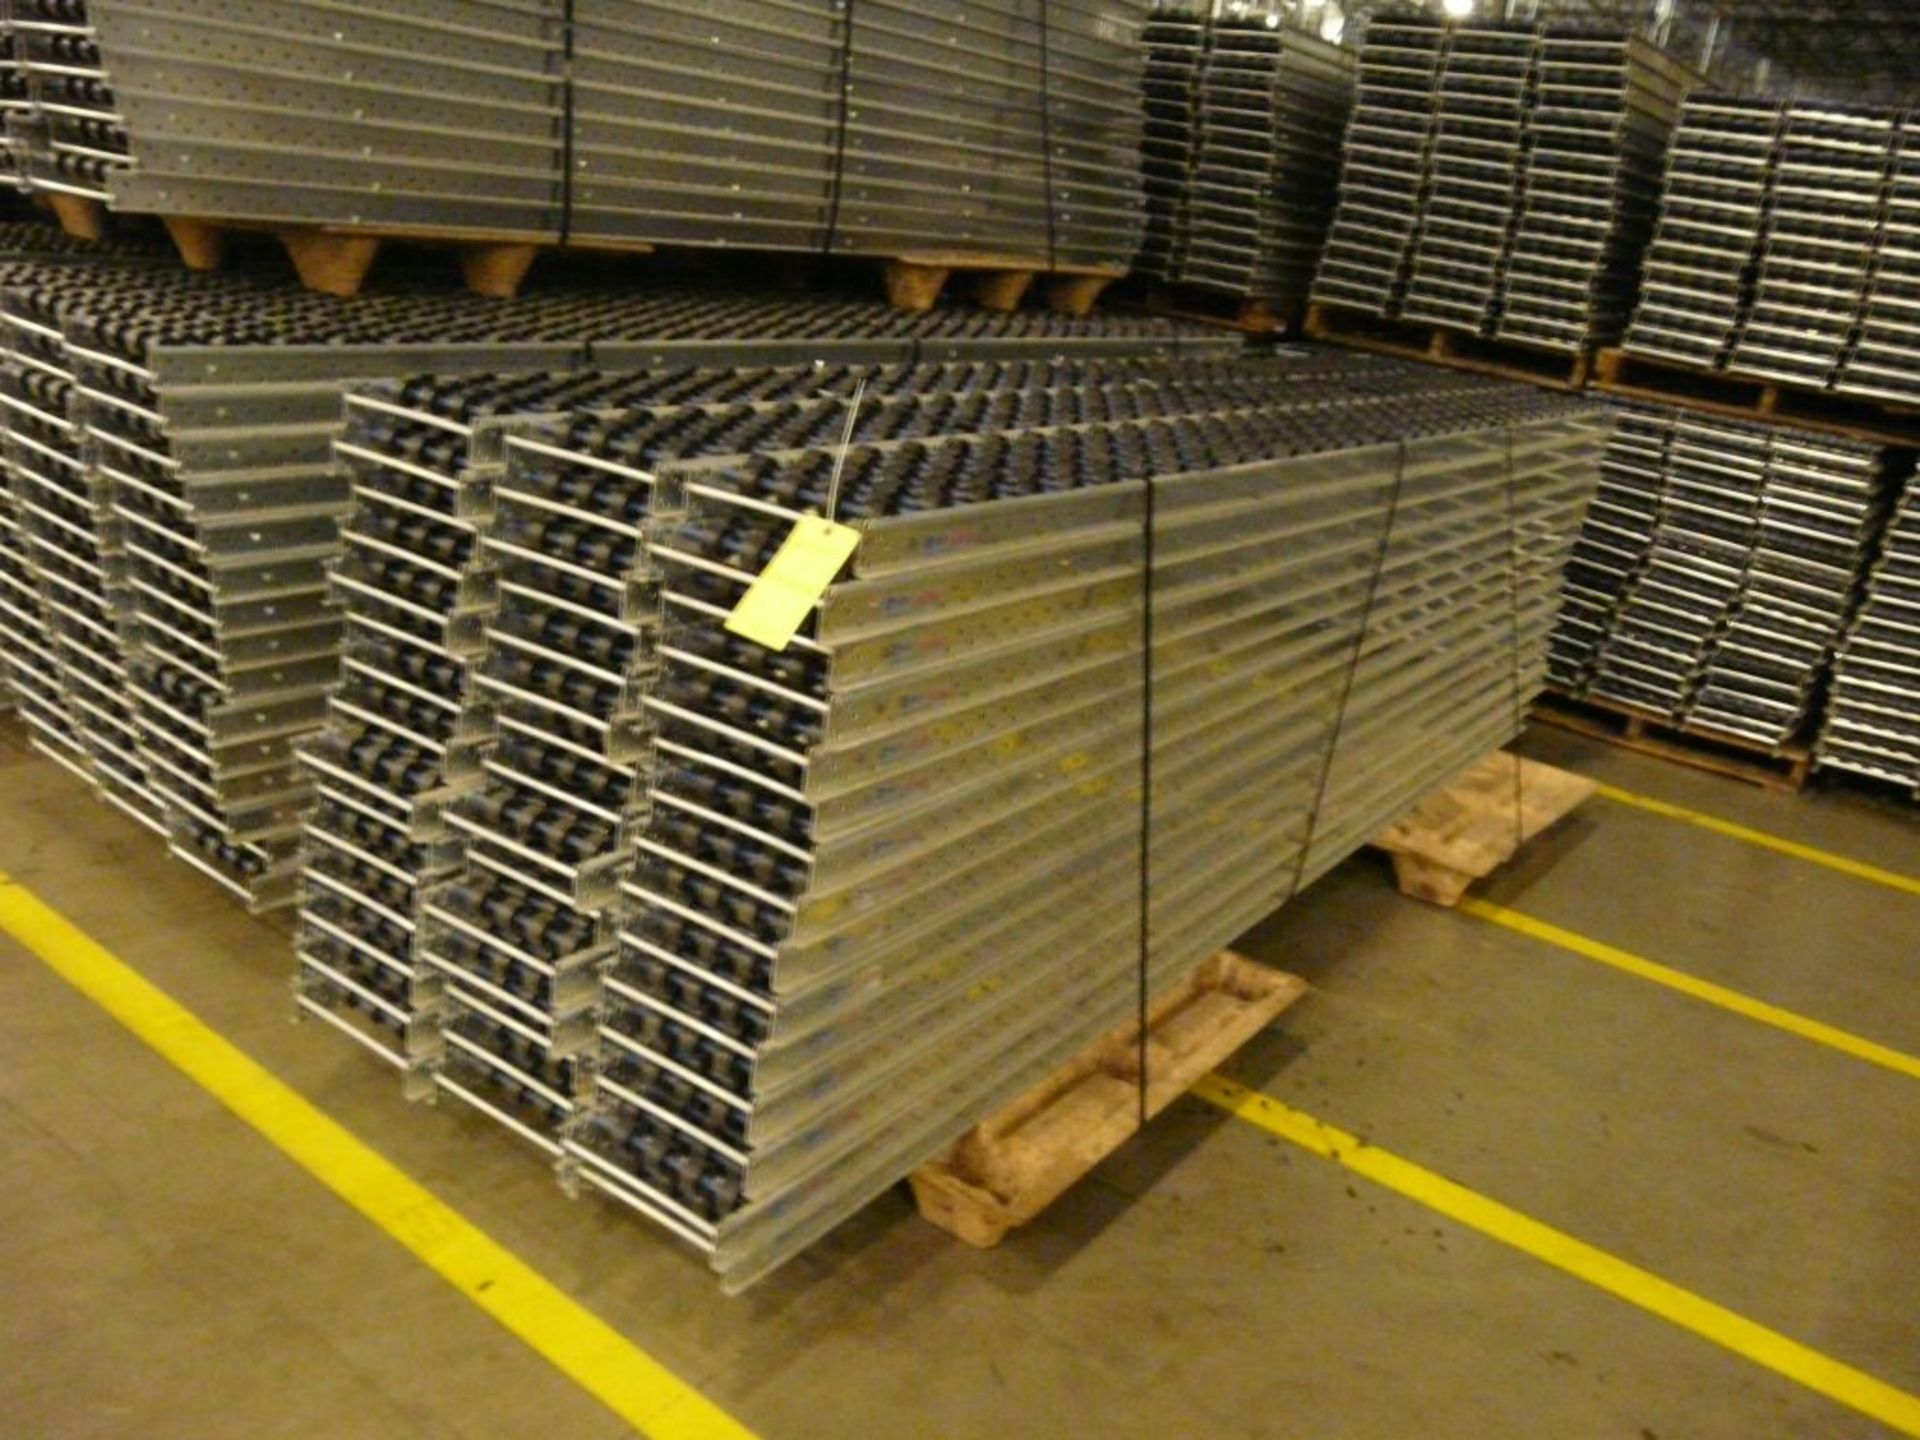 Lot of (90) SpanTrack Wheelbed Carton Flow Conveyors - 11.5'L x 11"W; Tag: 223573 - $30 Lot